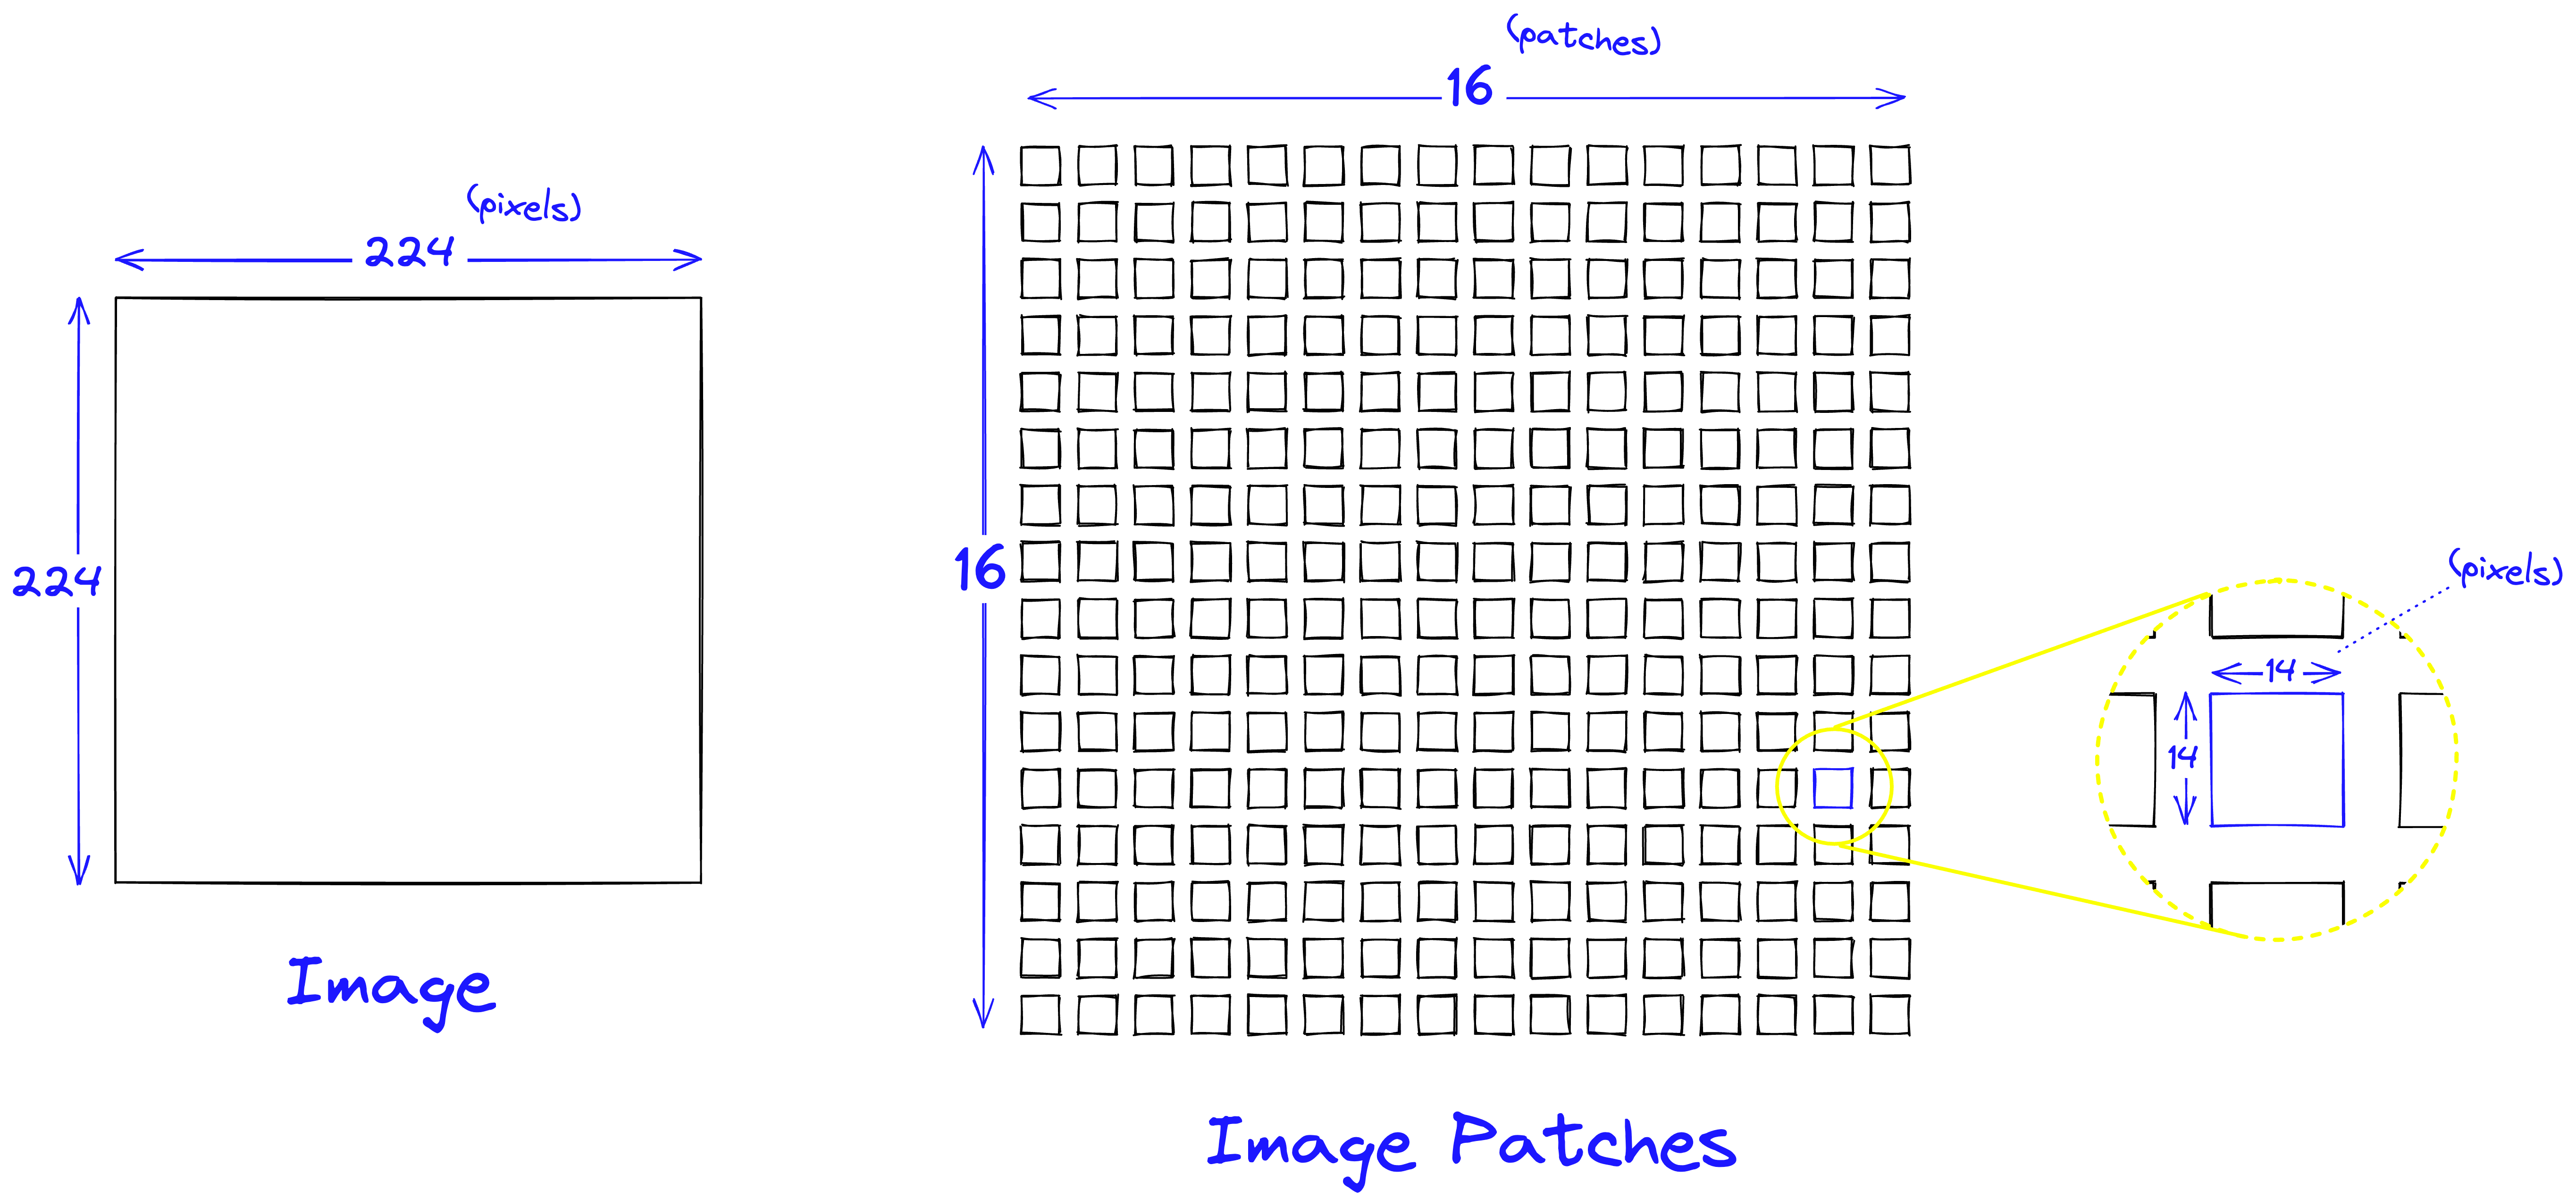 image-patches